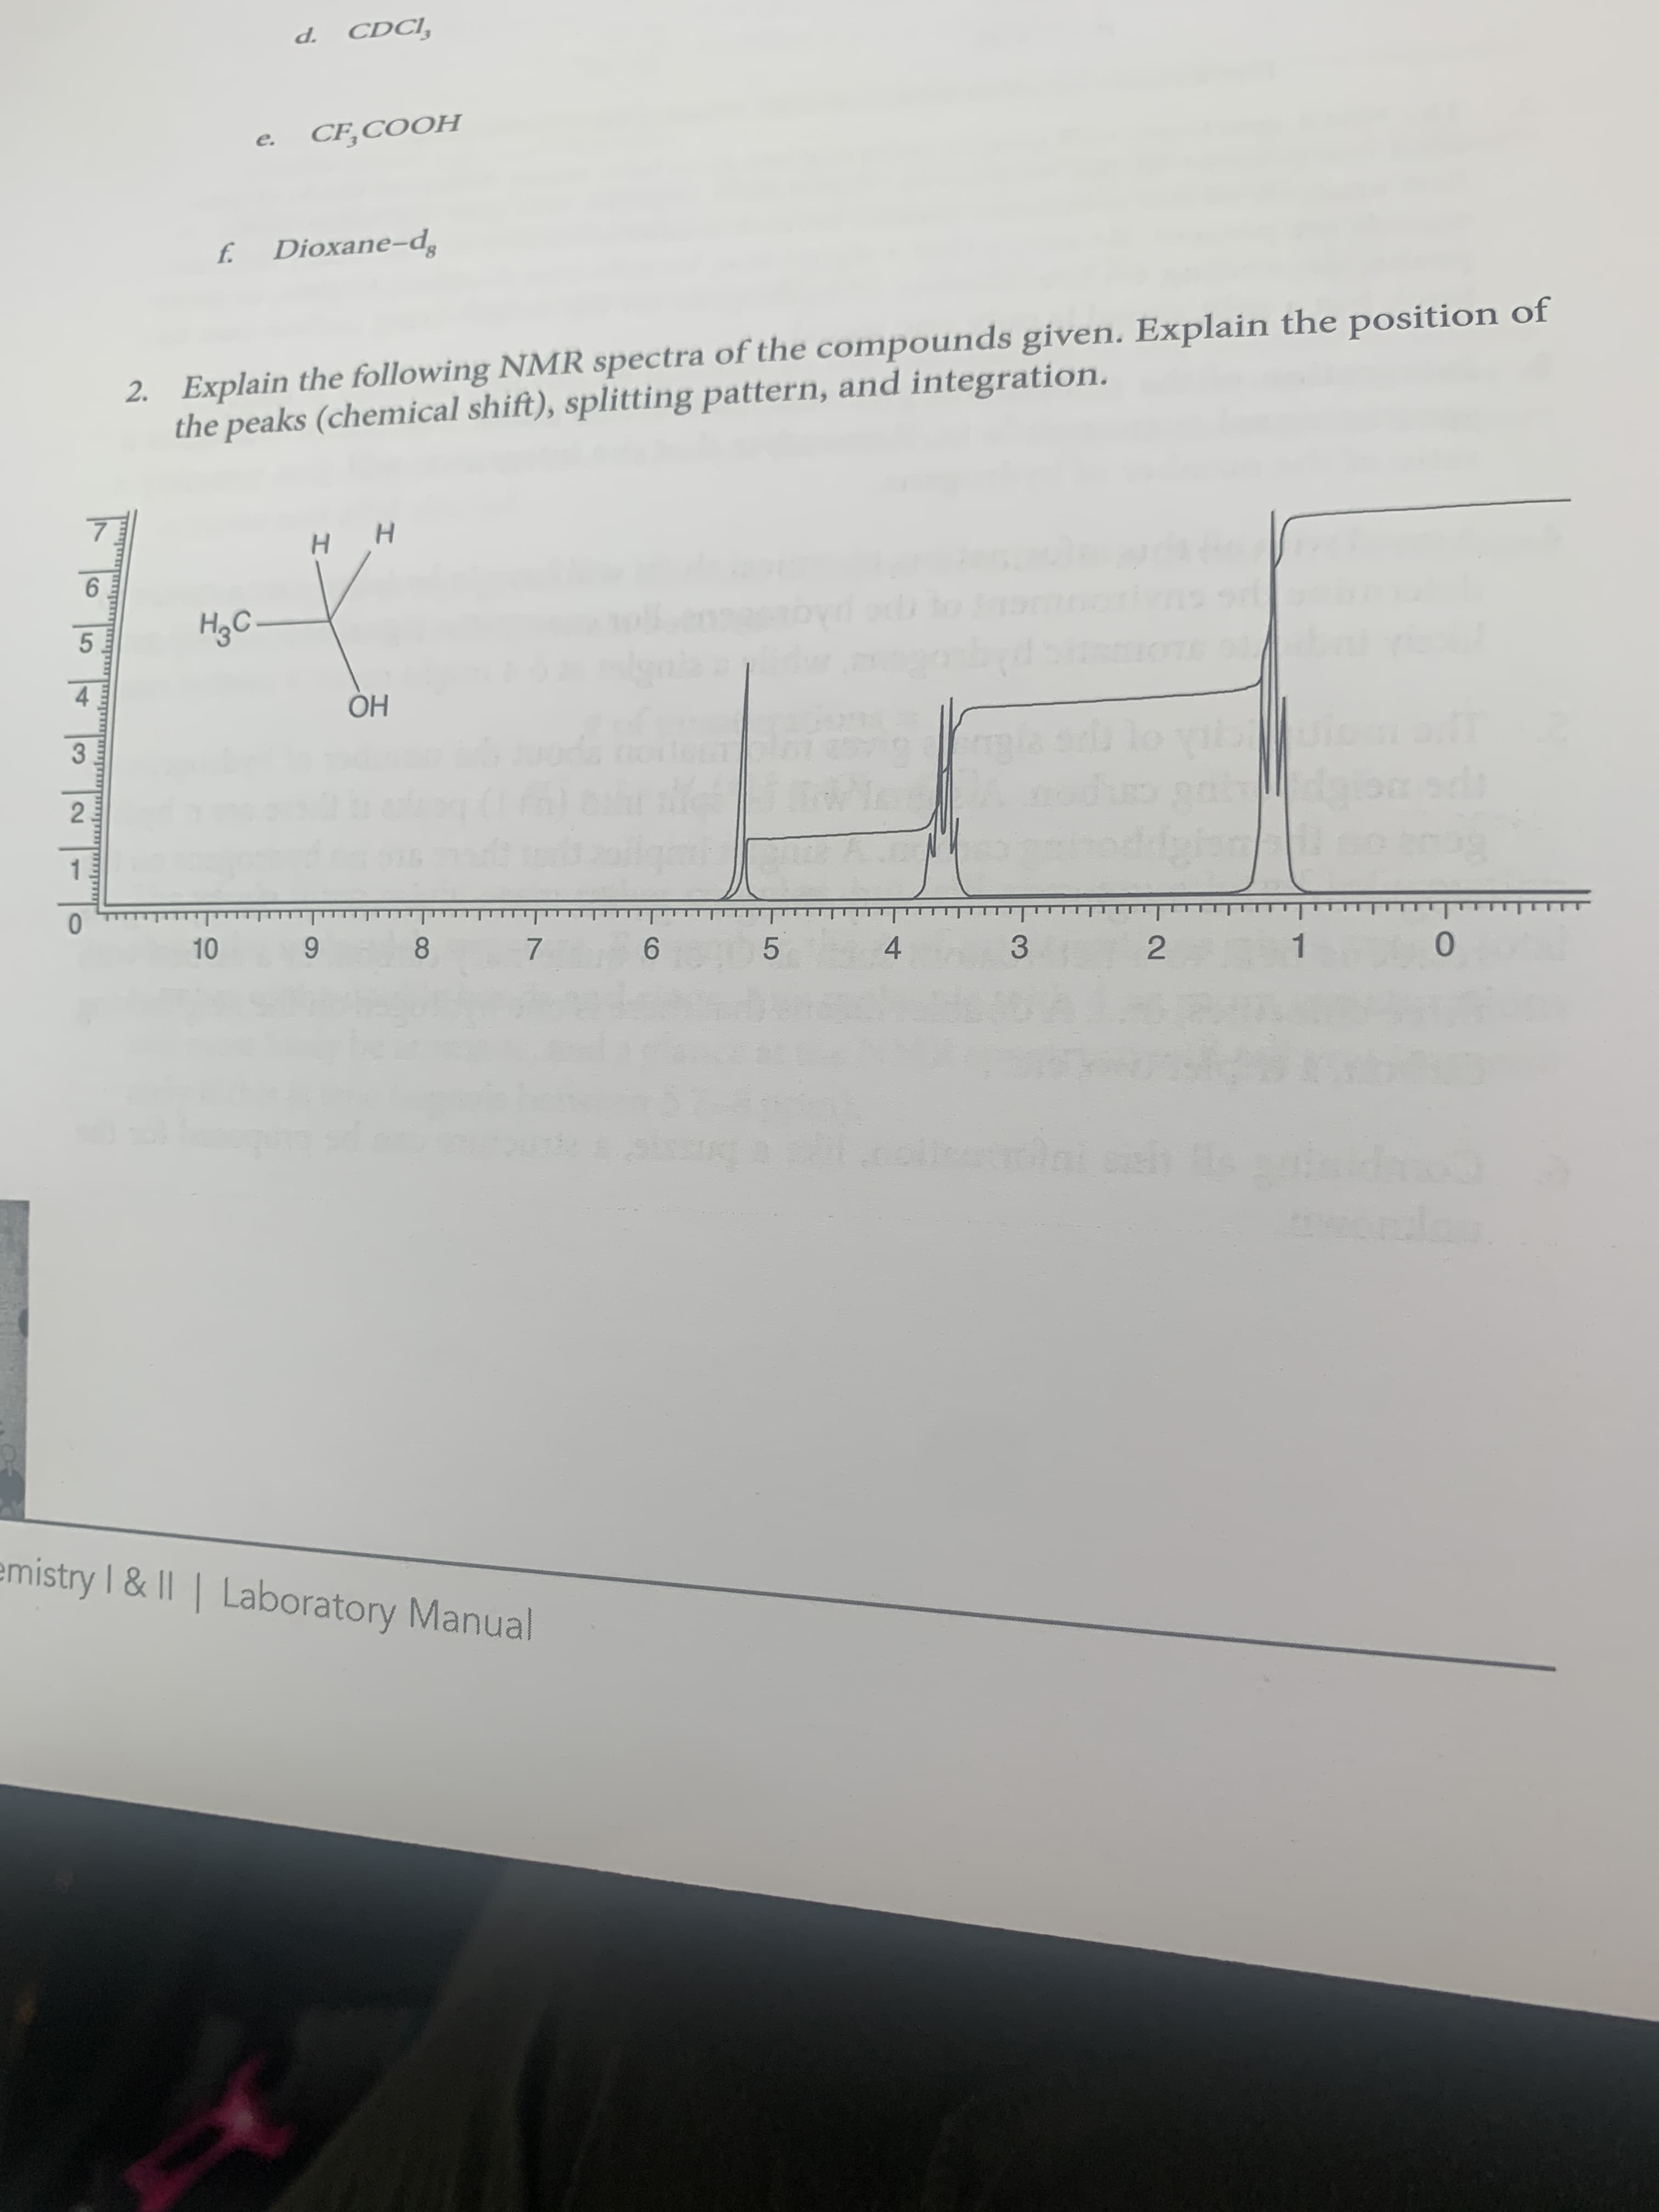 2. Explain the following NMR spectra of the compounds given. Explain the position of
the peaks (chemical shift), splitting pattern, and integration.
HgC–
OH
10
8.
7.
6.
4
3.
1
2.
2N
